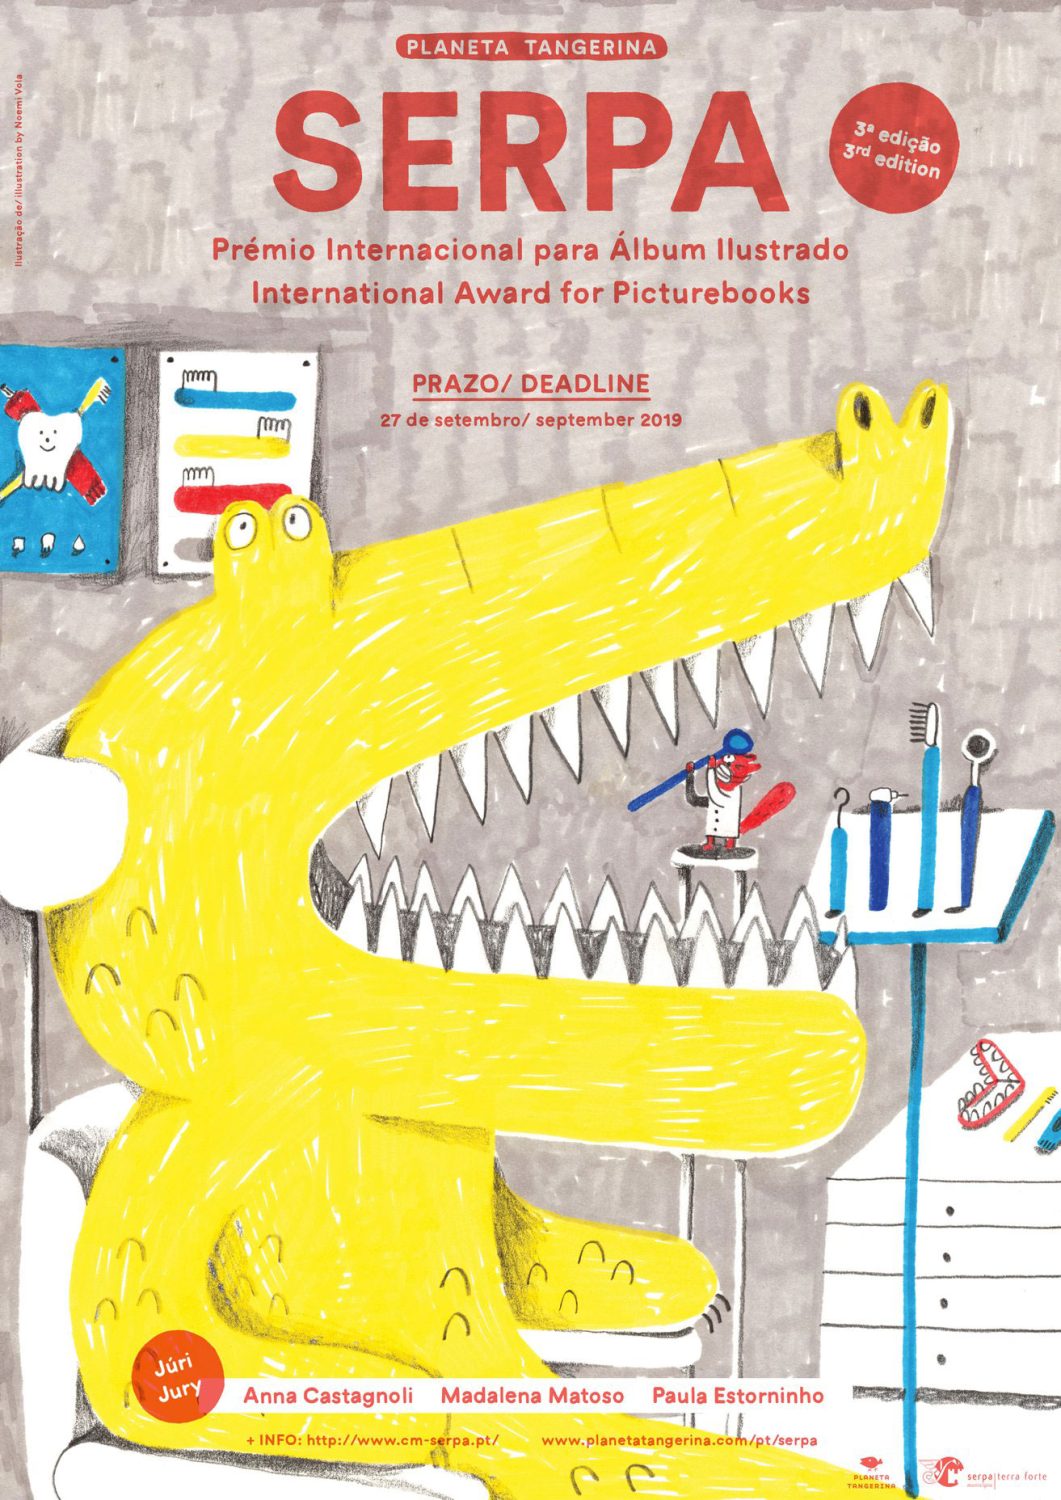 SERPA – International Award for Picturebooks, 3rd edition